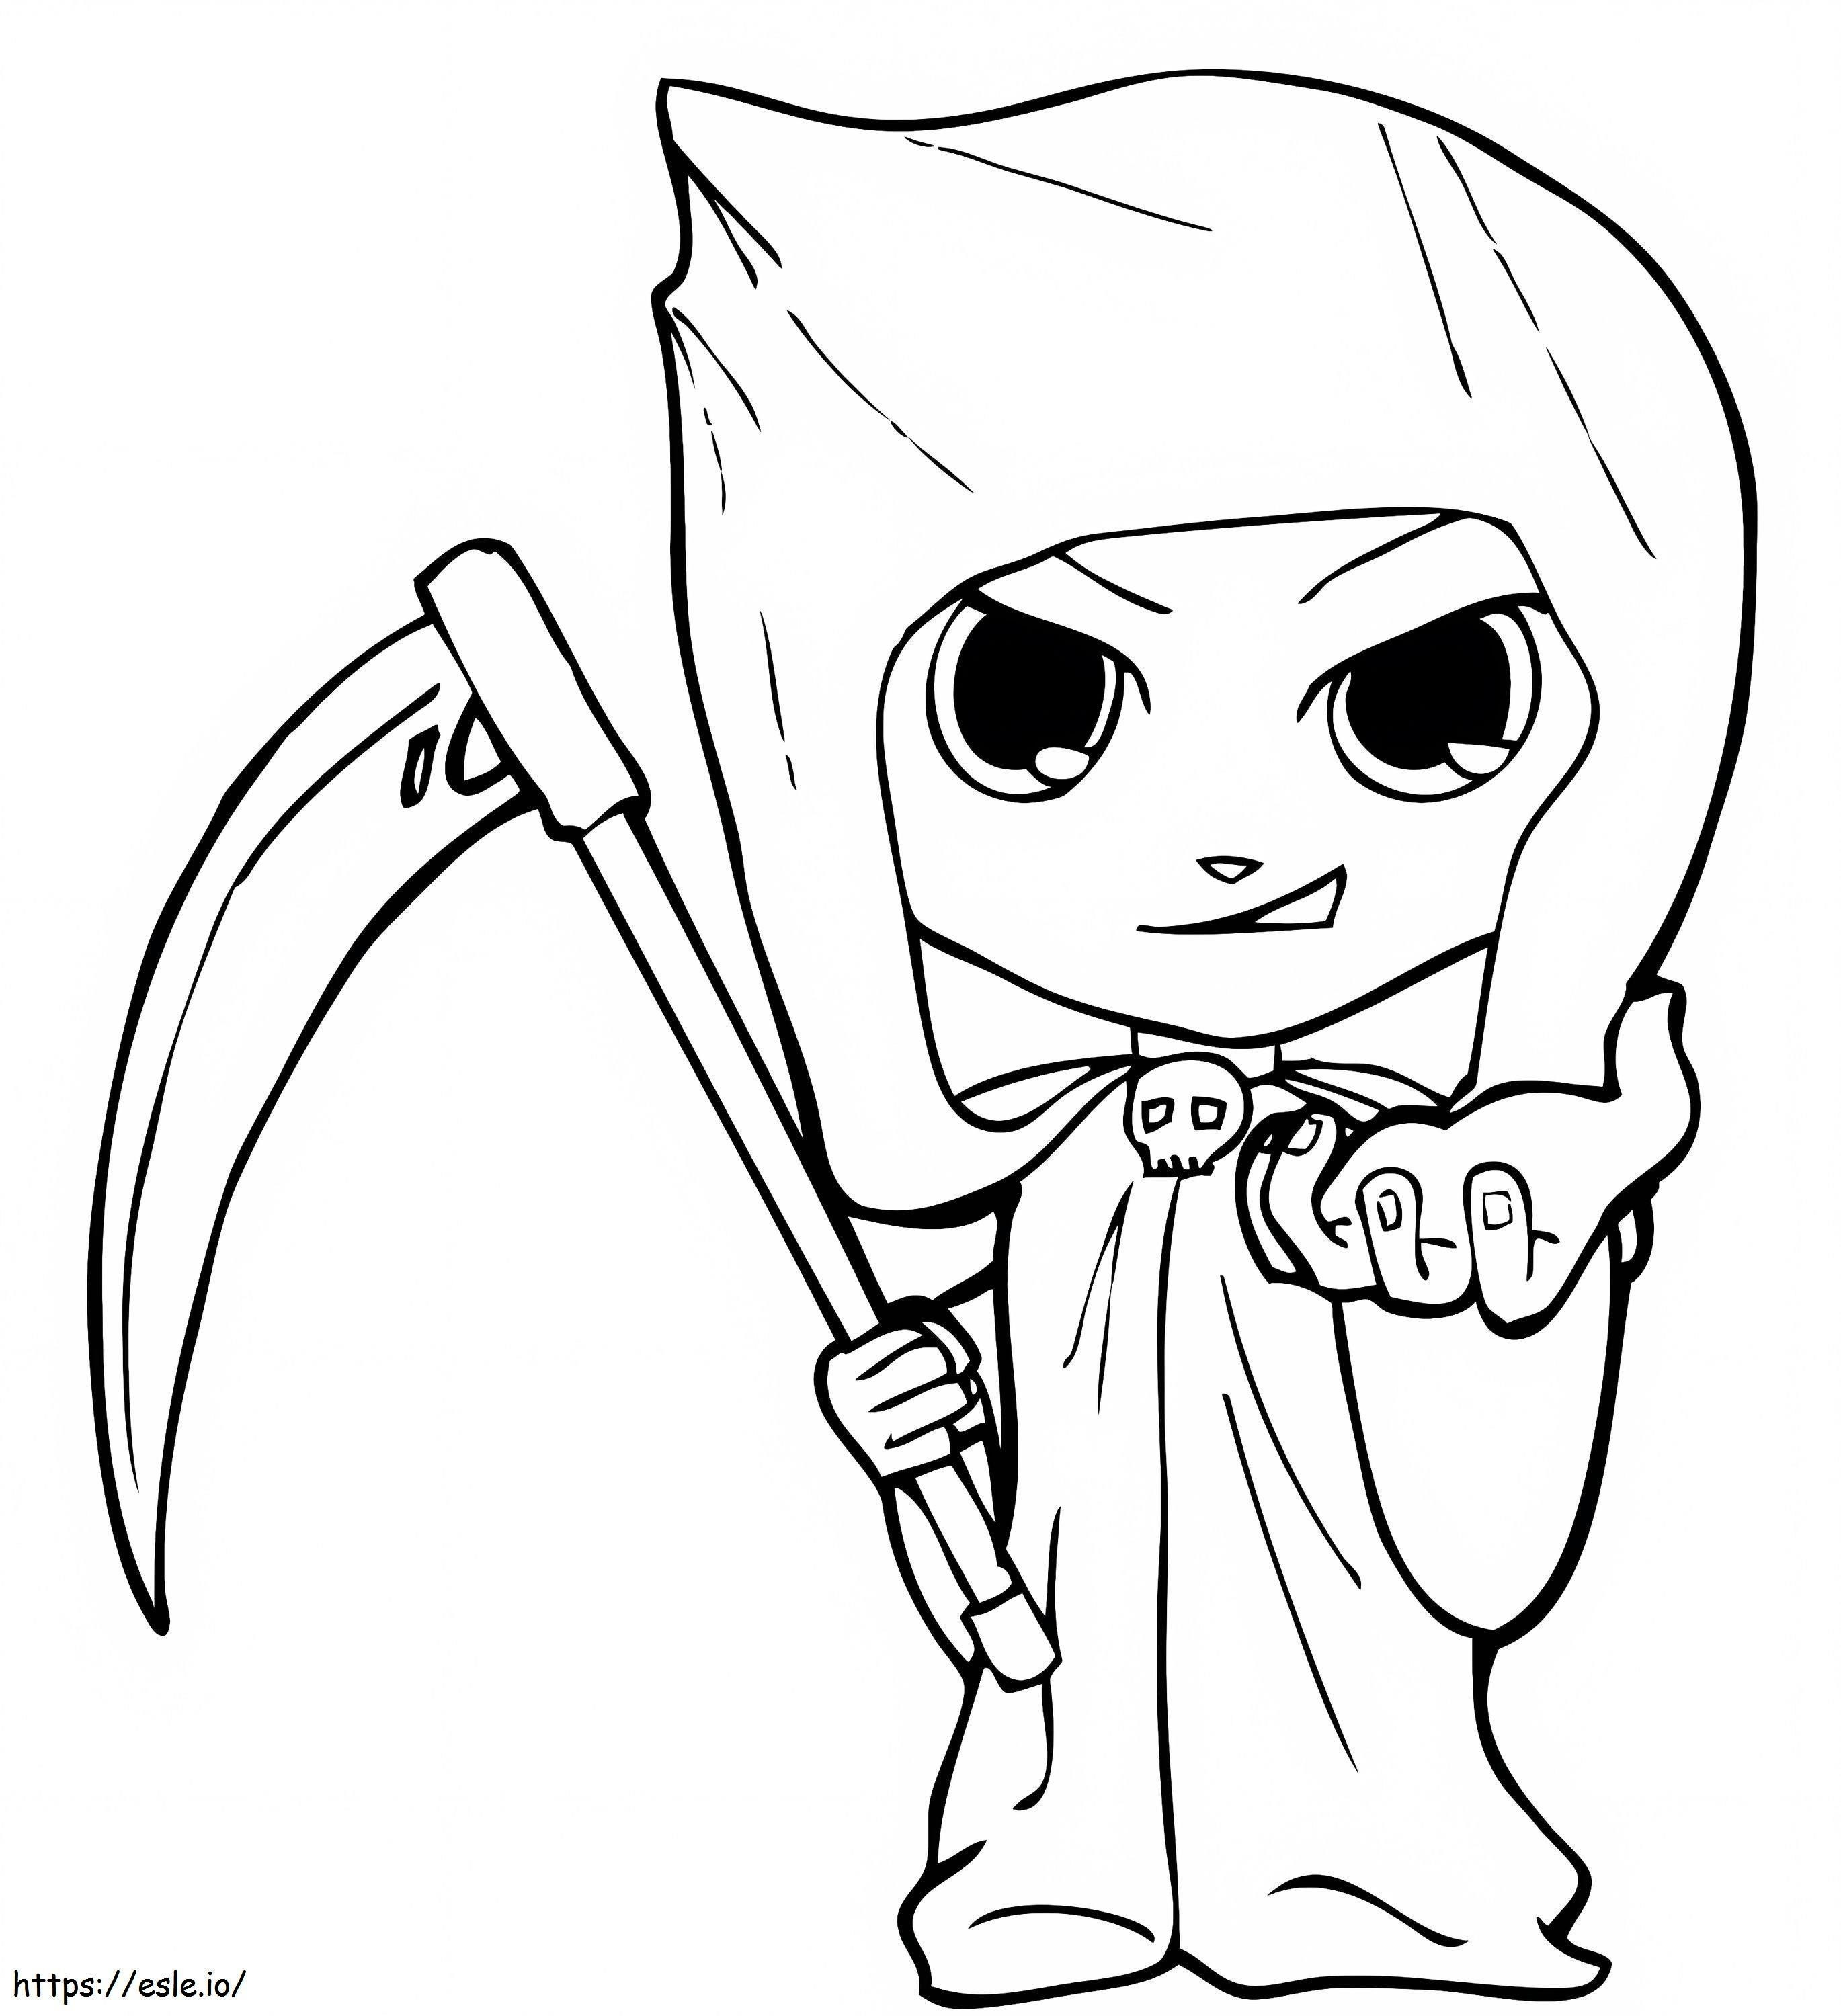 Baby Grim Reaper coloring page